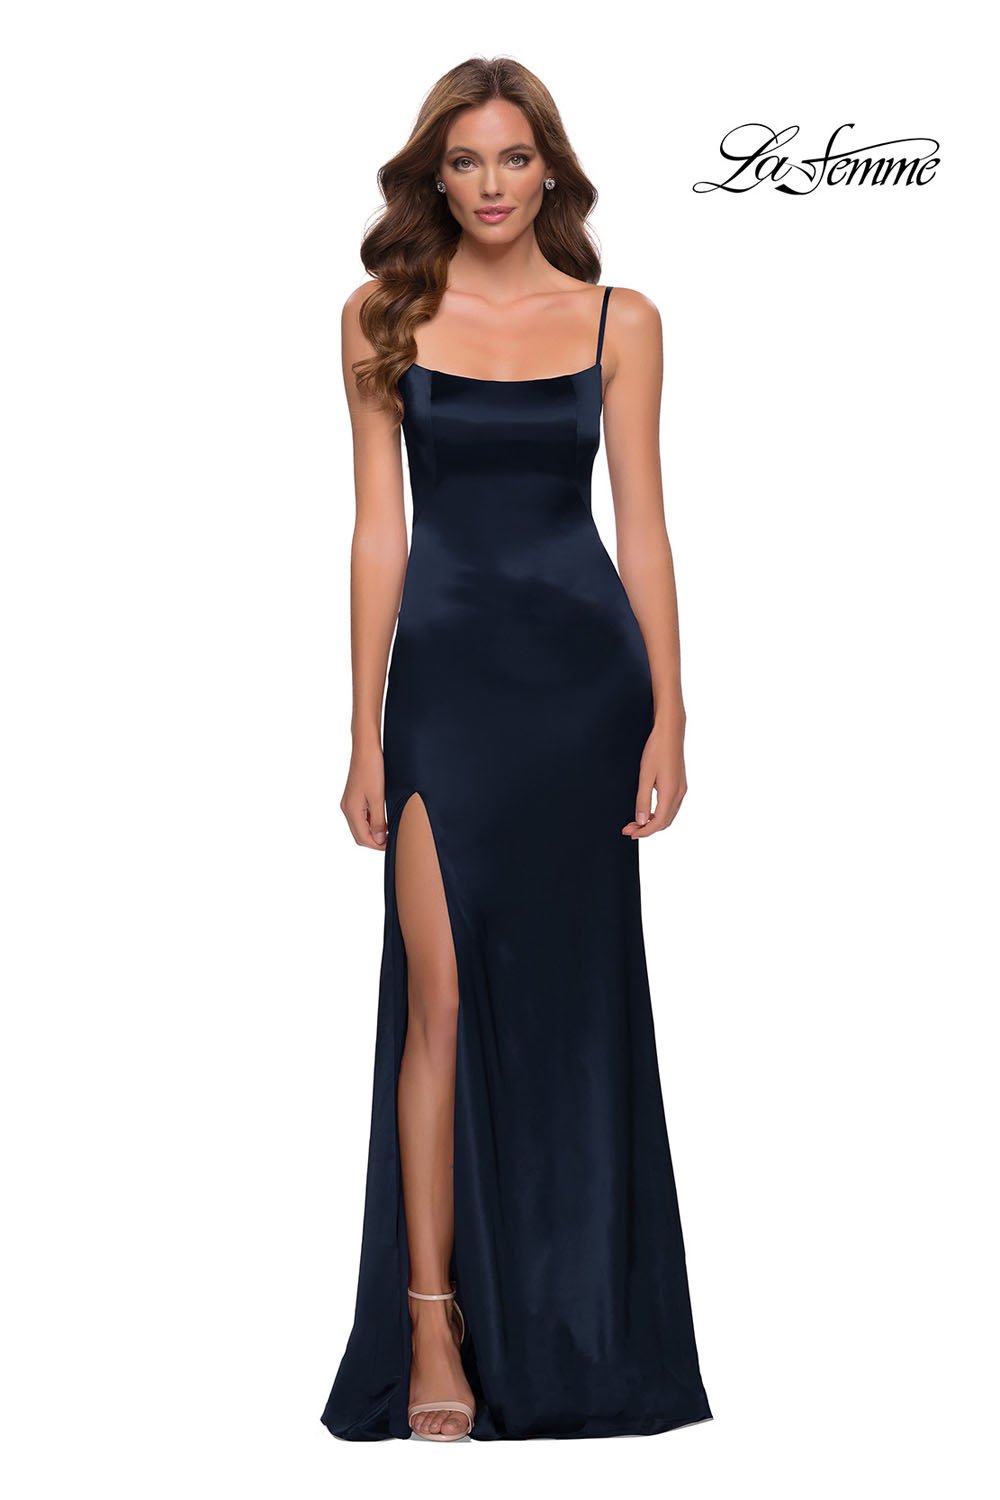 La Femme 29945 dress images in these colors: Burgundy, Navy, White.